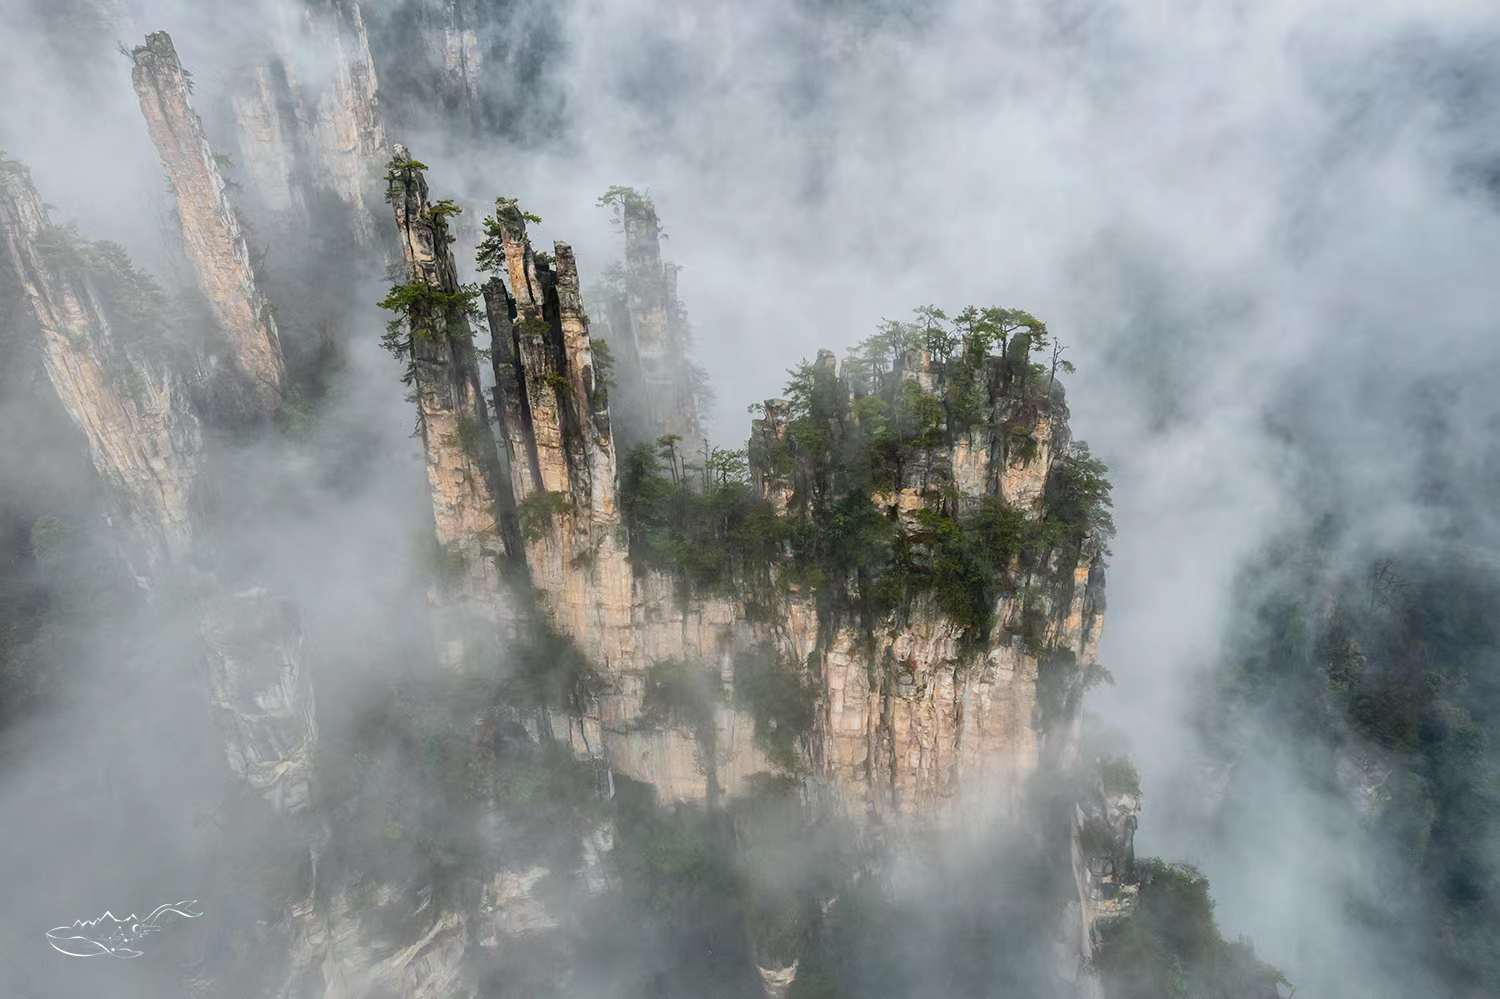 Day 2: Peripheral creation in Zhangjiajie all day